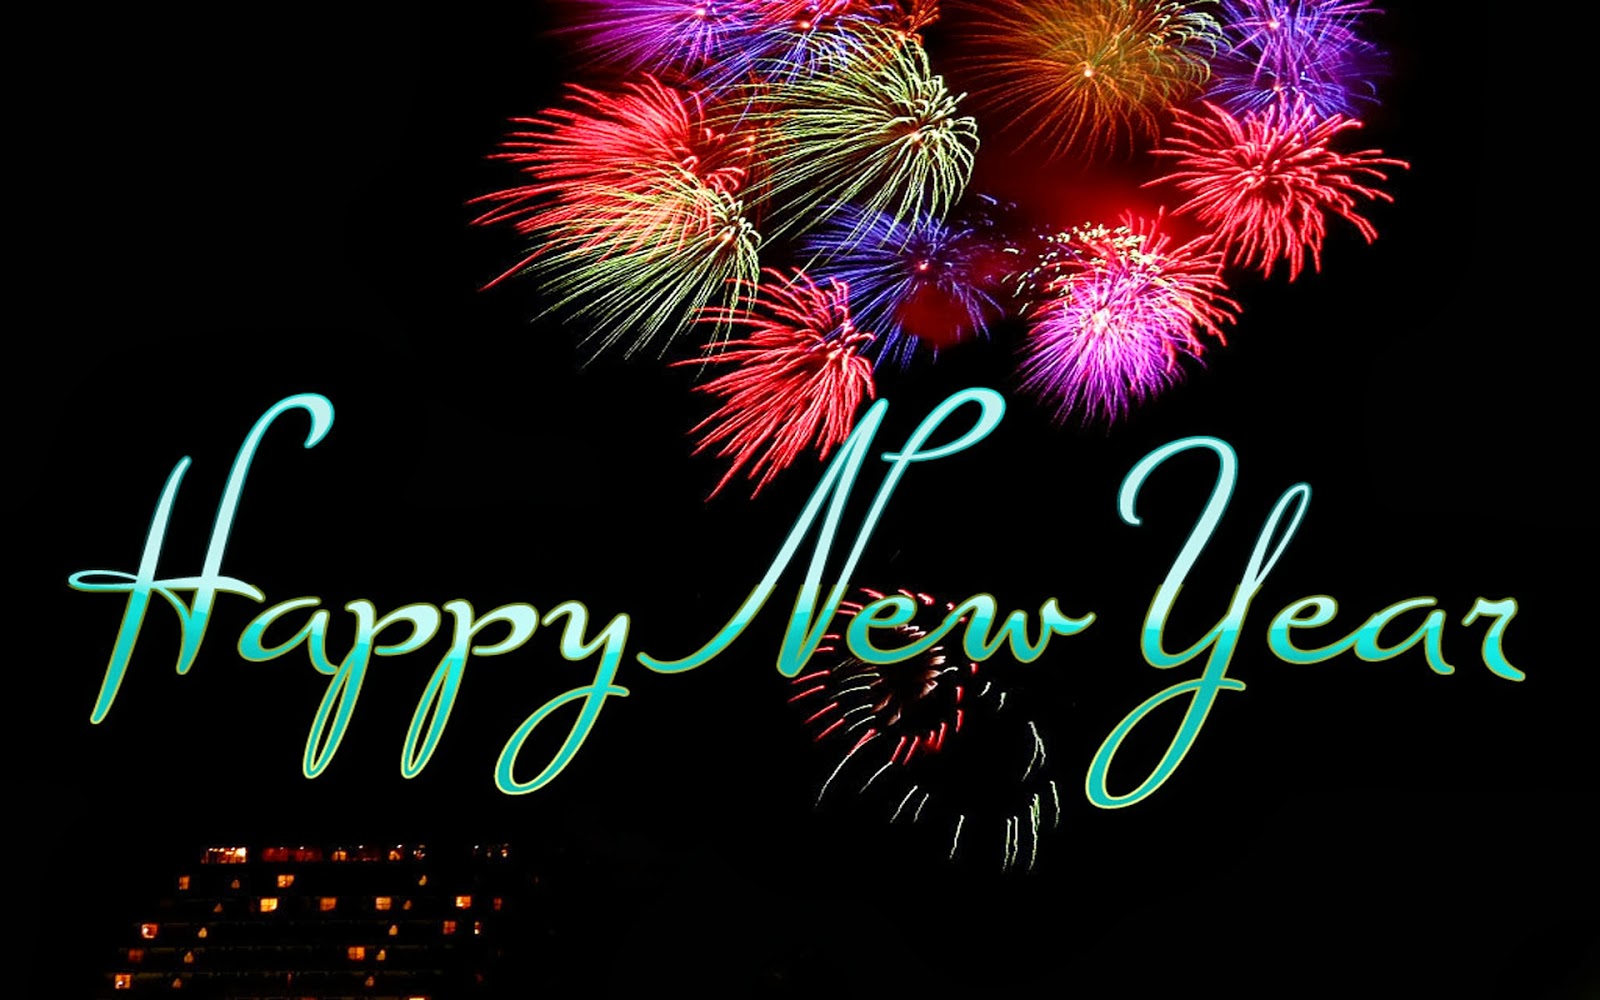 new wallpapers free,fireworks,new years day,text,new year,holiday